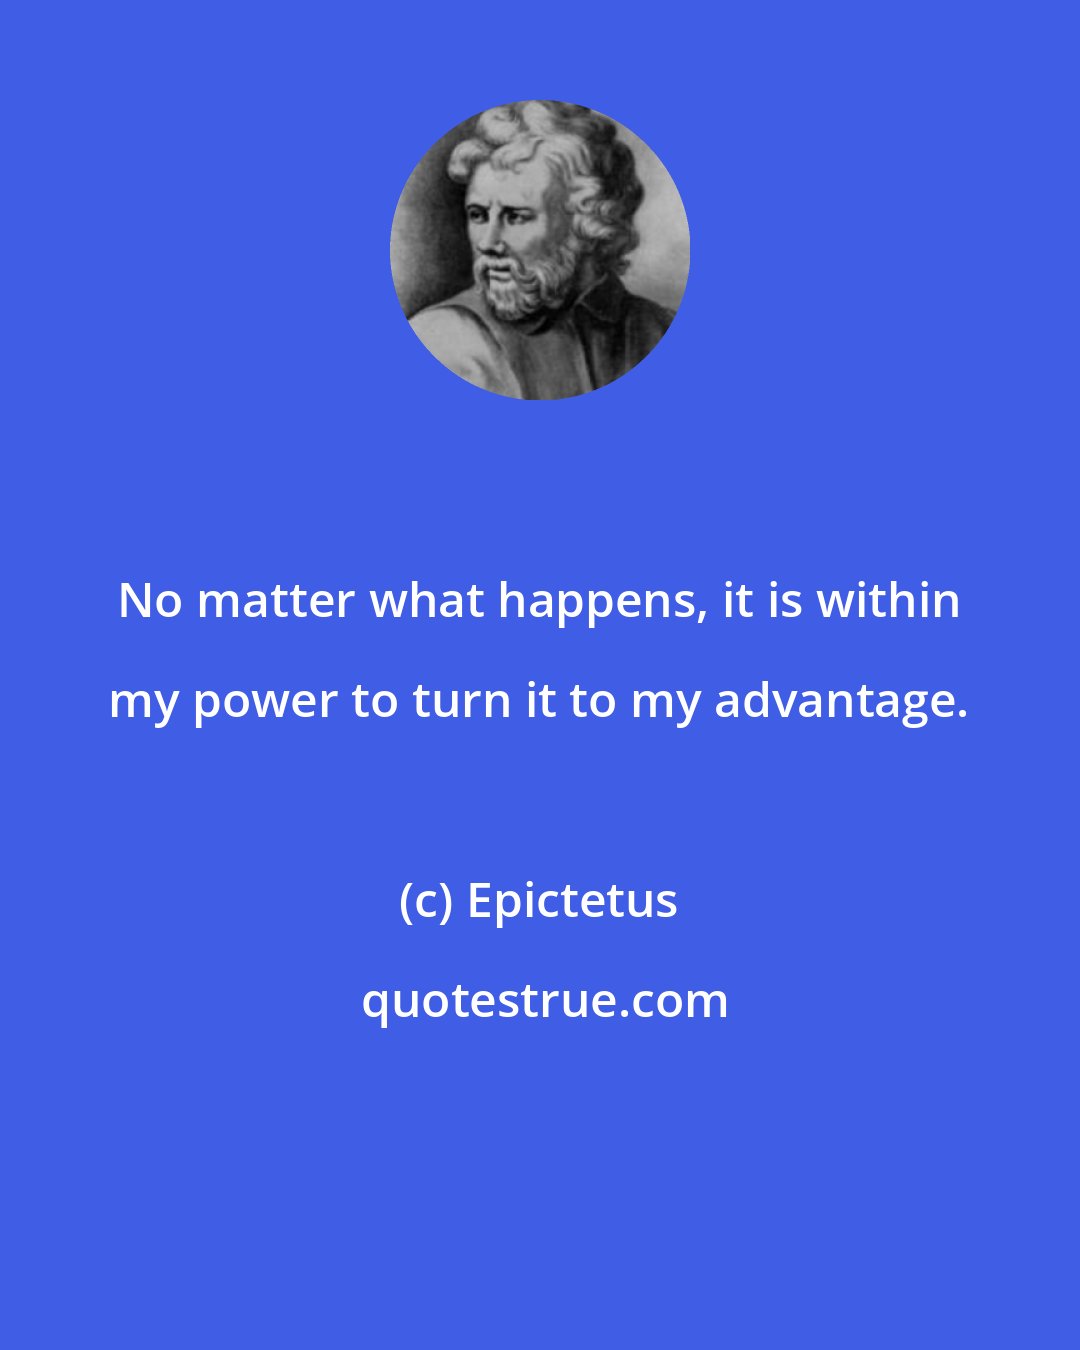 Epictetus: No matter what happens, it is within my power to turn it to my advantage.